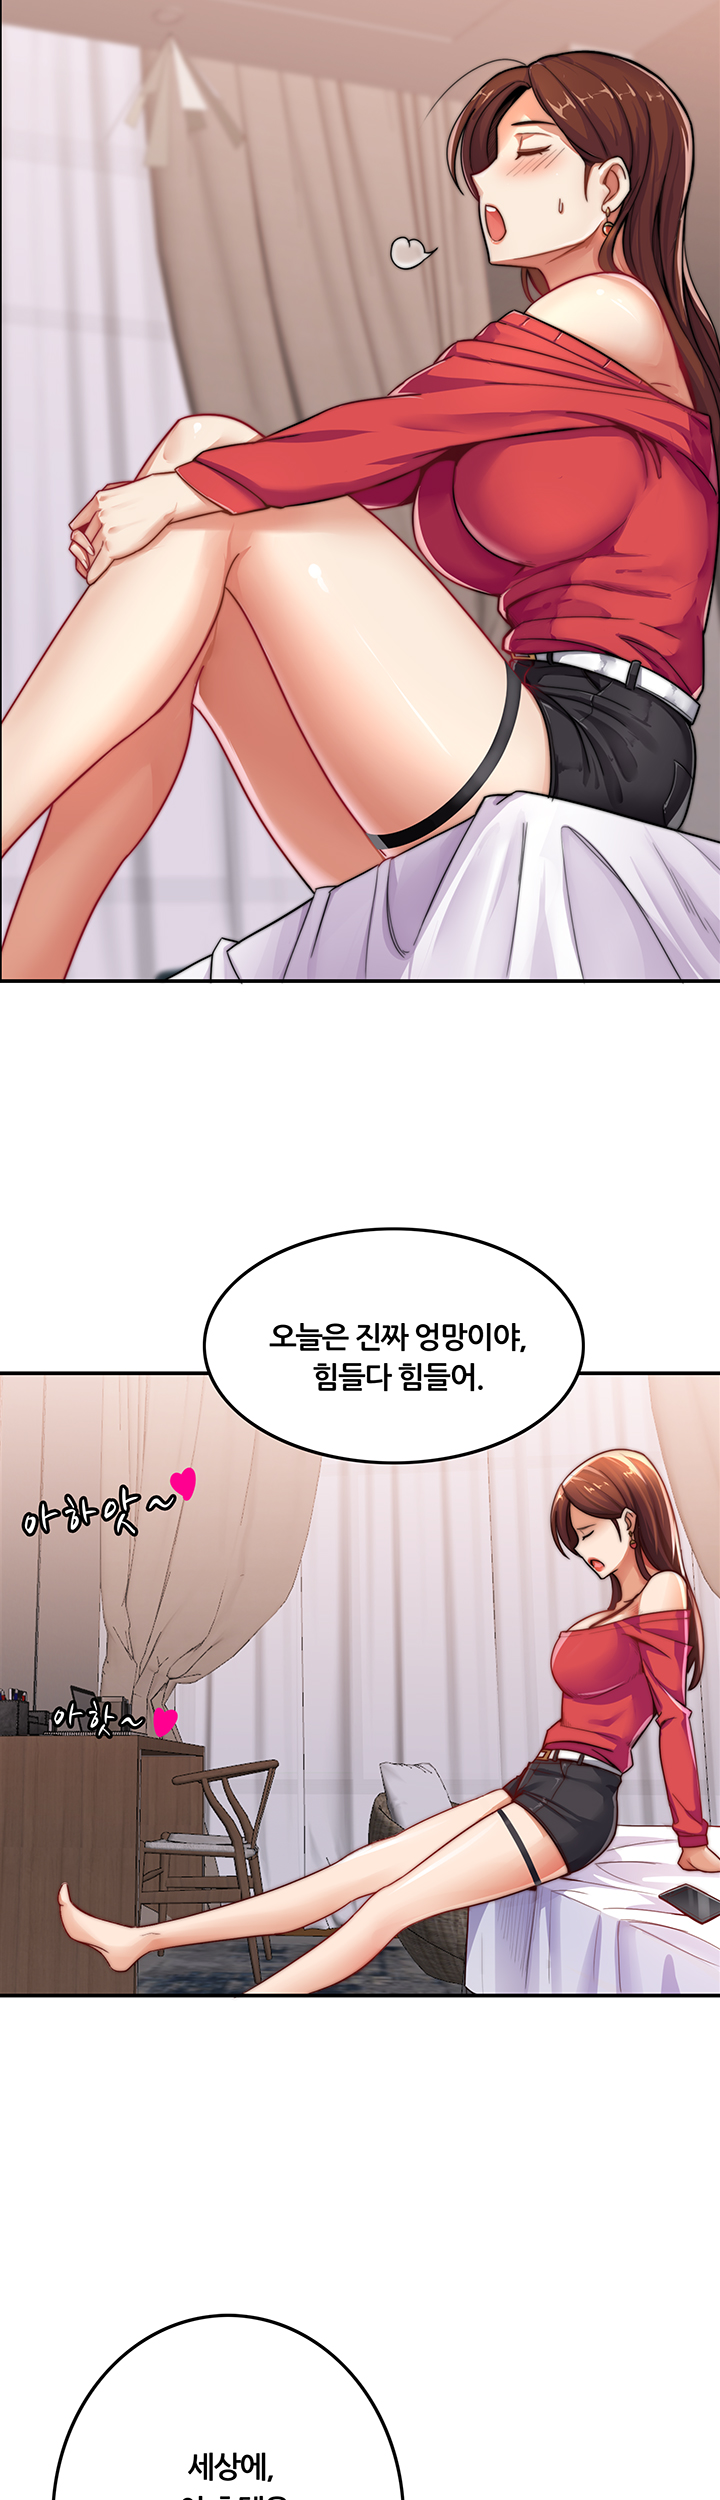 Lover Exchange Raw - Chapter 3 Page 38